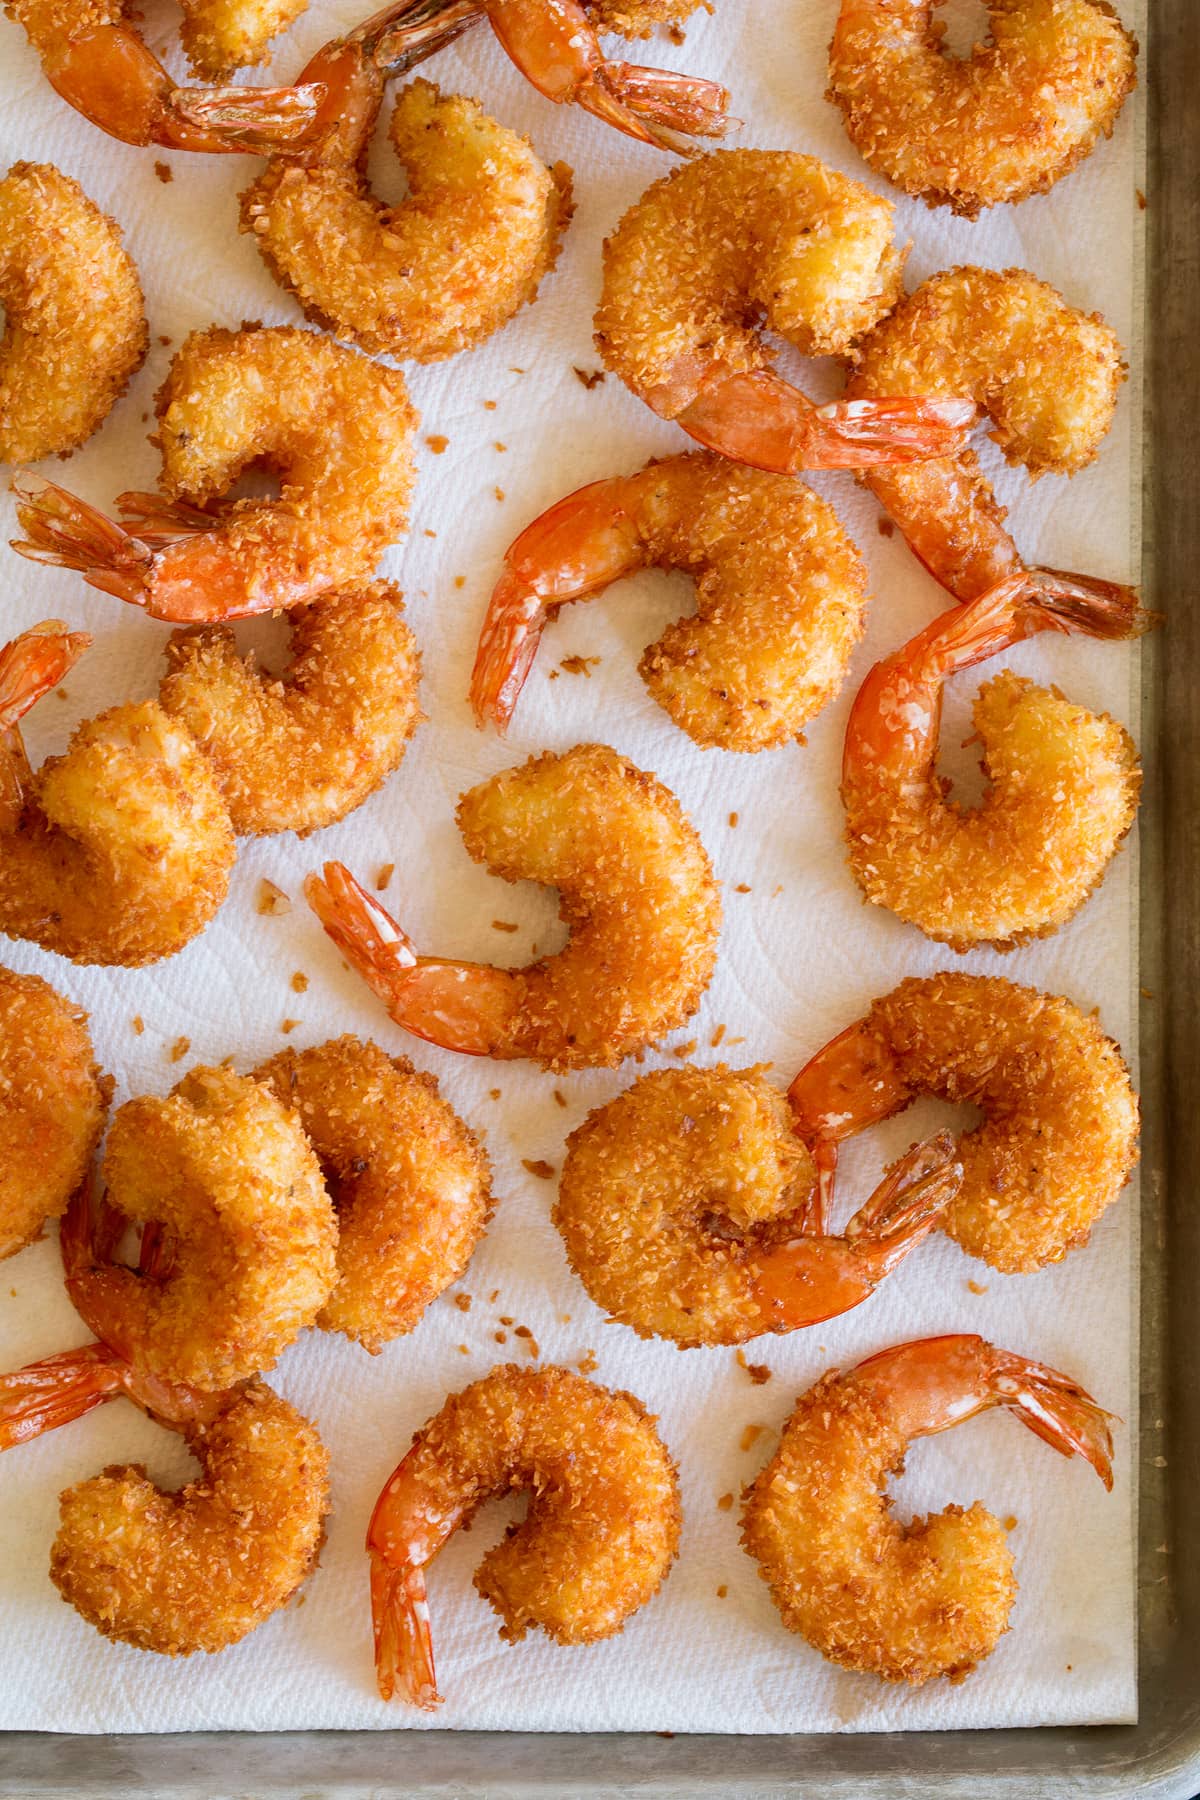 Overhead photo of coconut shrimp shown spread out and draining on paper towels.